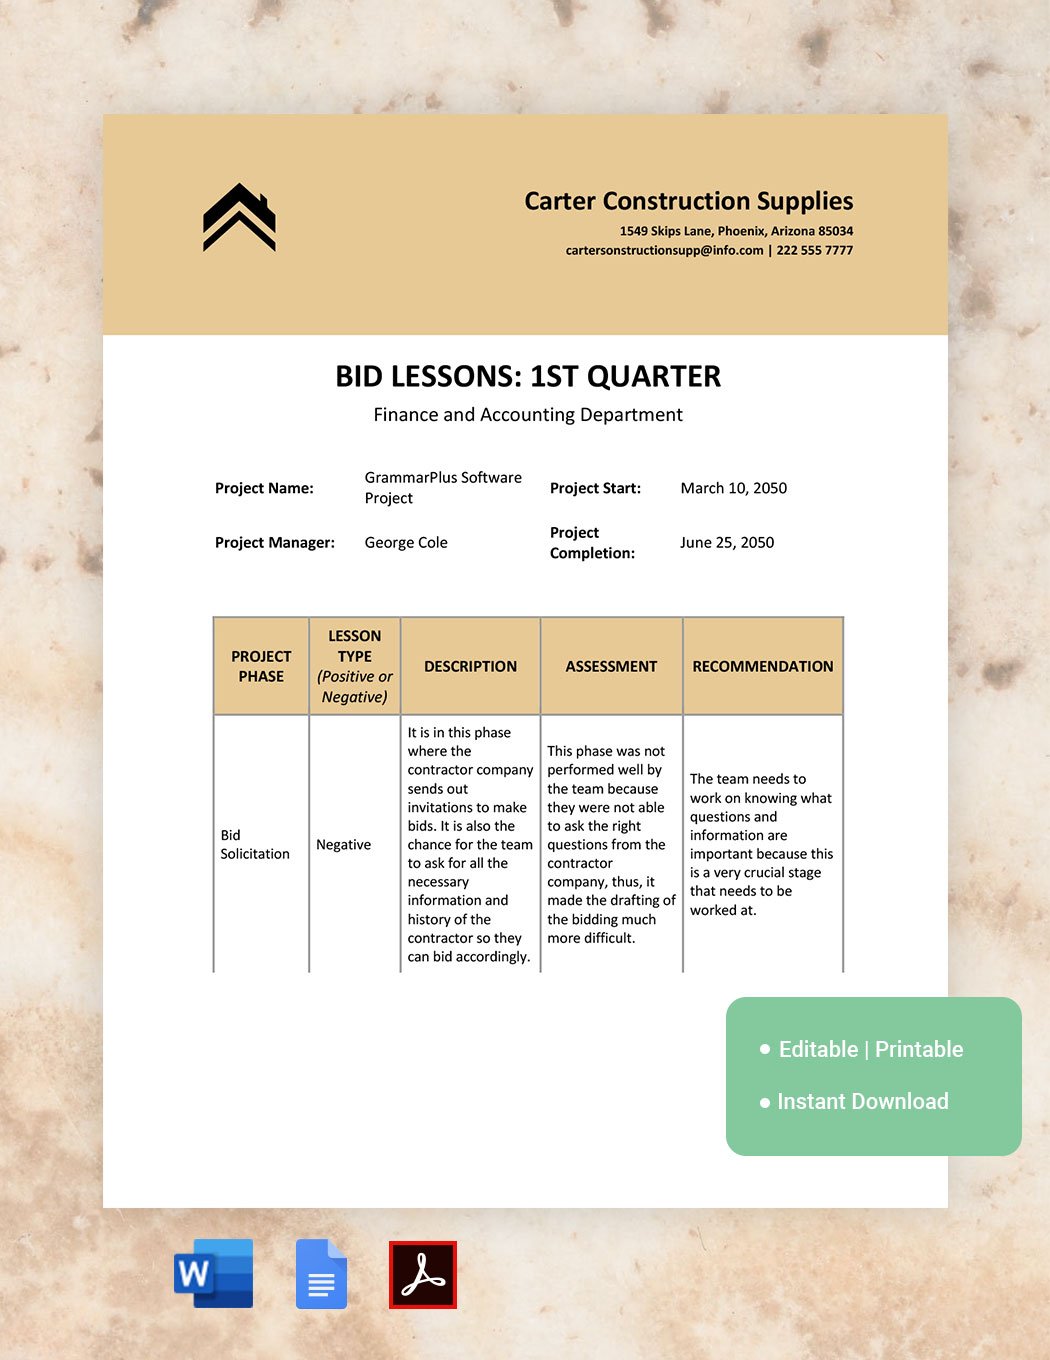 Bid Lessons Learned Template